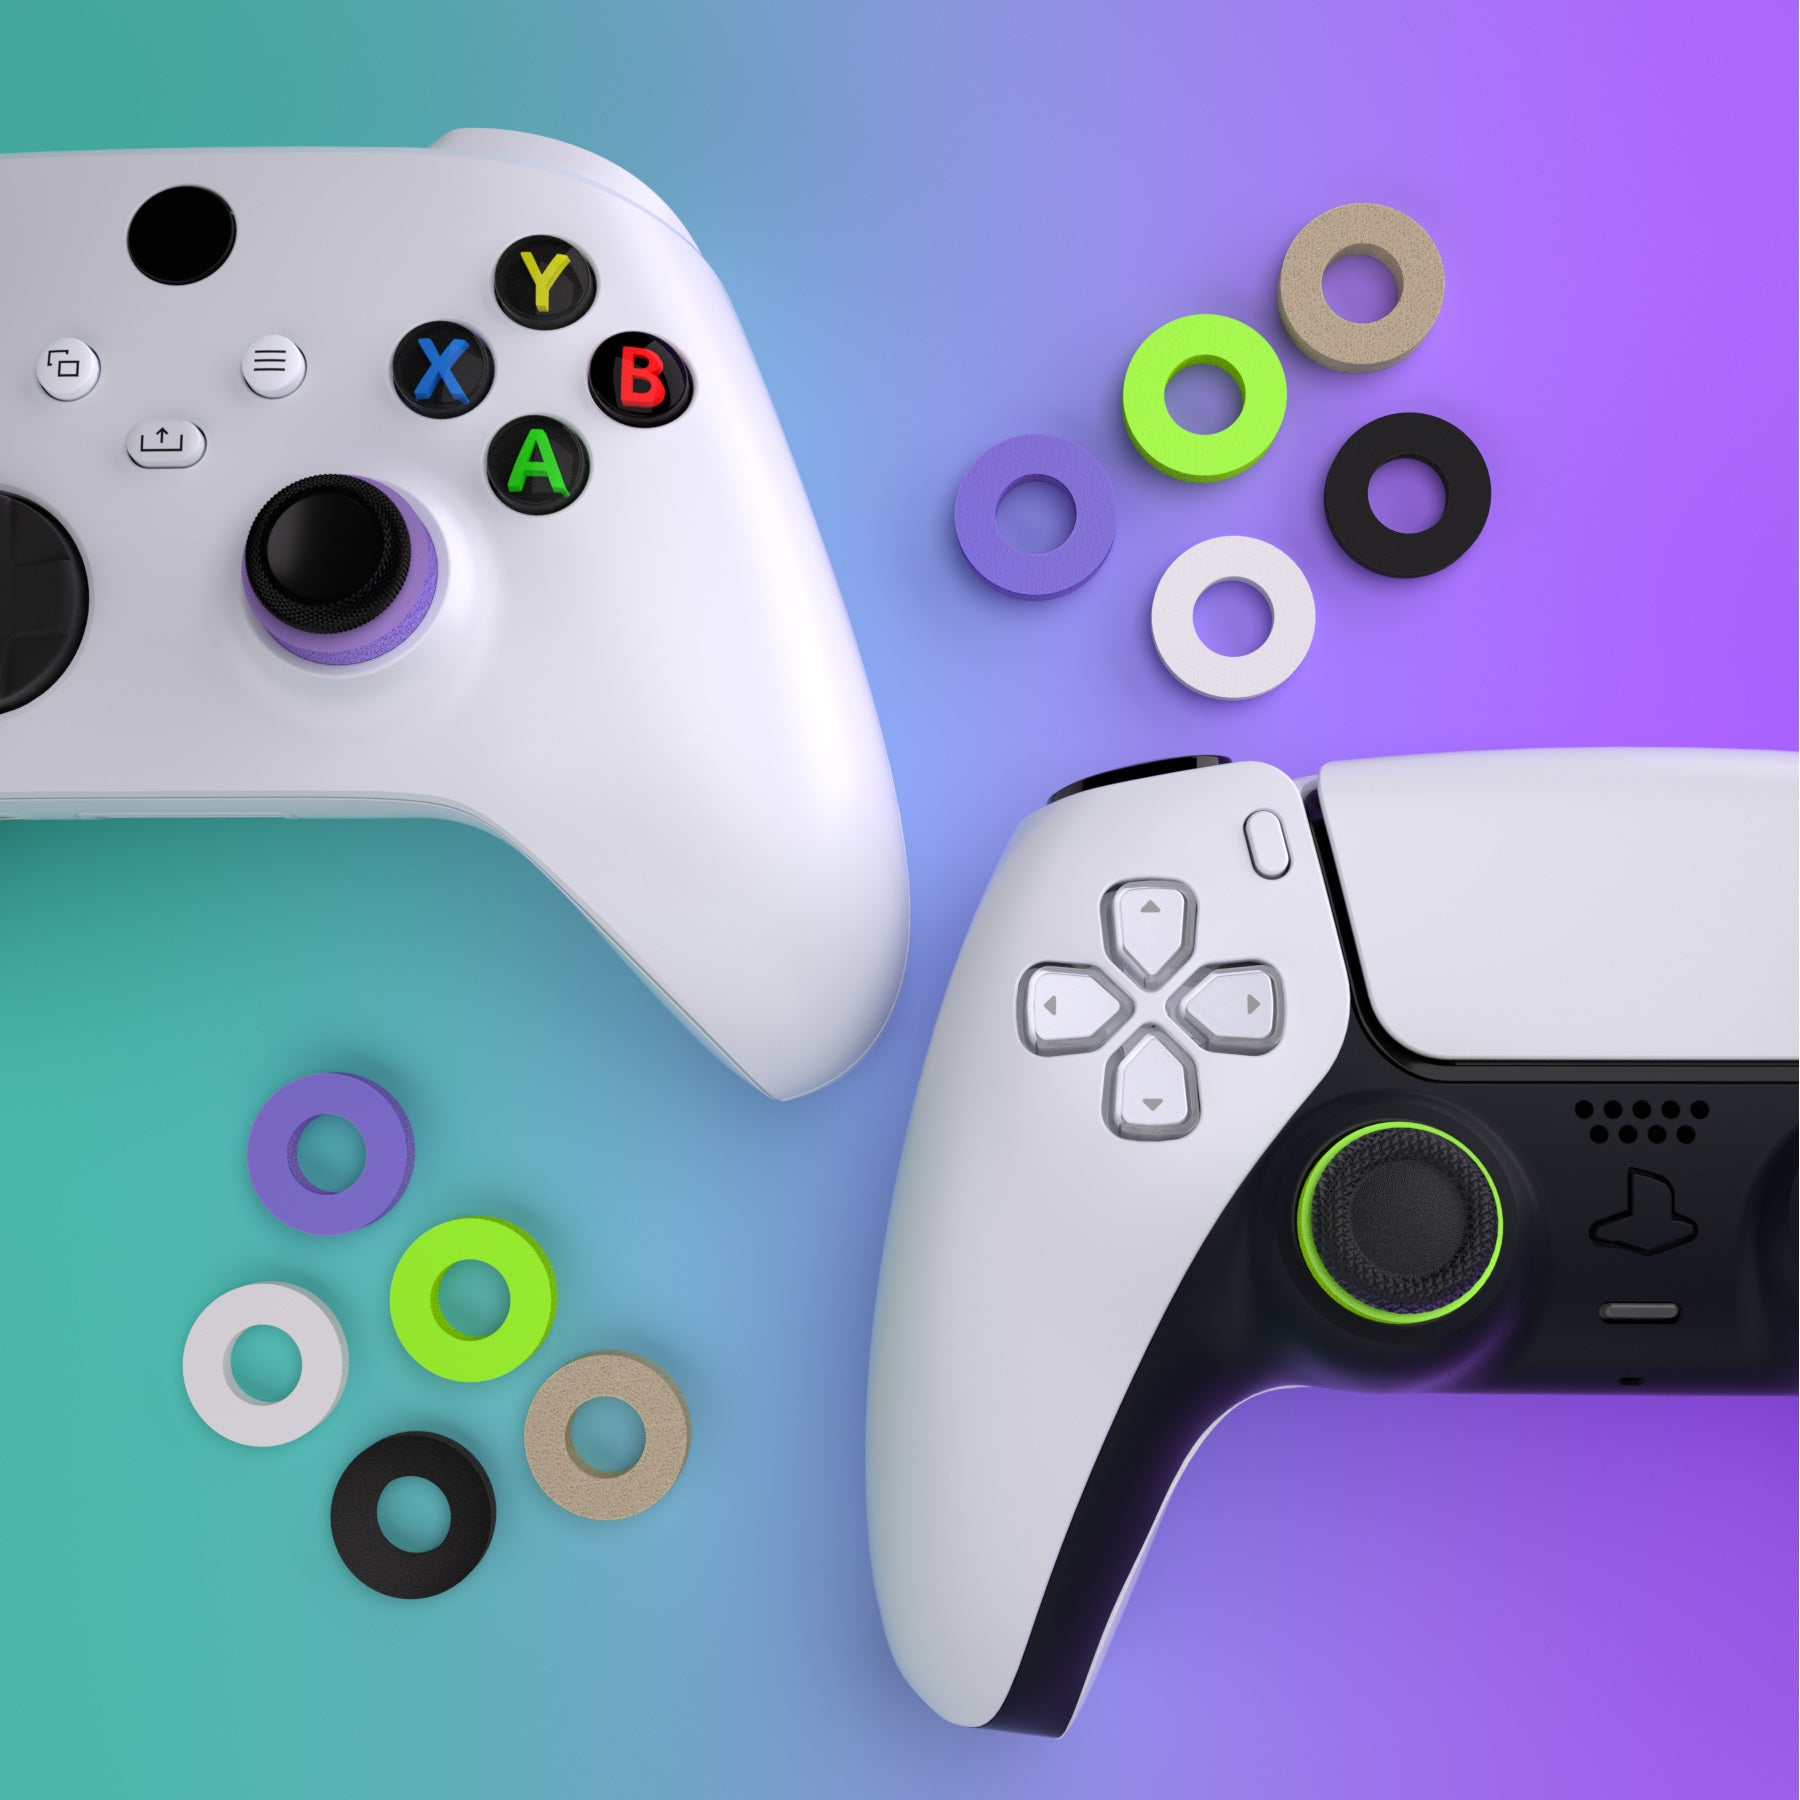 PlayVital 5 Pairs Aim Assist Target Motion Control Precision Rings for ps5, for ps4, for Xbox Series X/S, Xbox One, Xbox 360, for Switch Pro Controller, for Steam Deck - Green Purple Gray Black White - PFPJ117 PlayVital